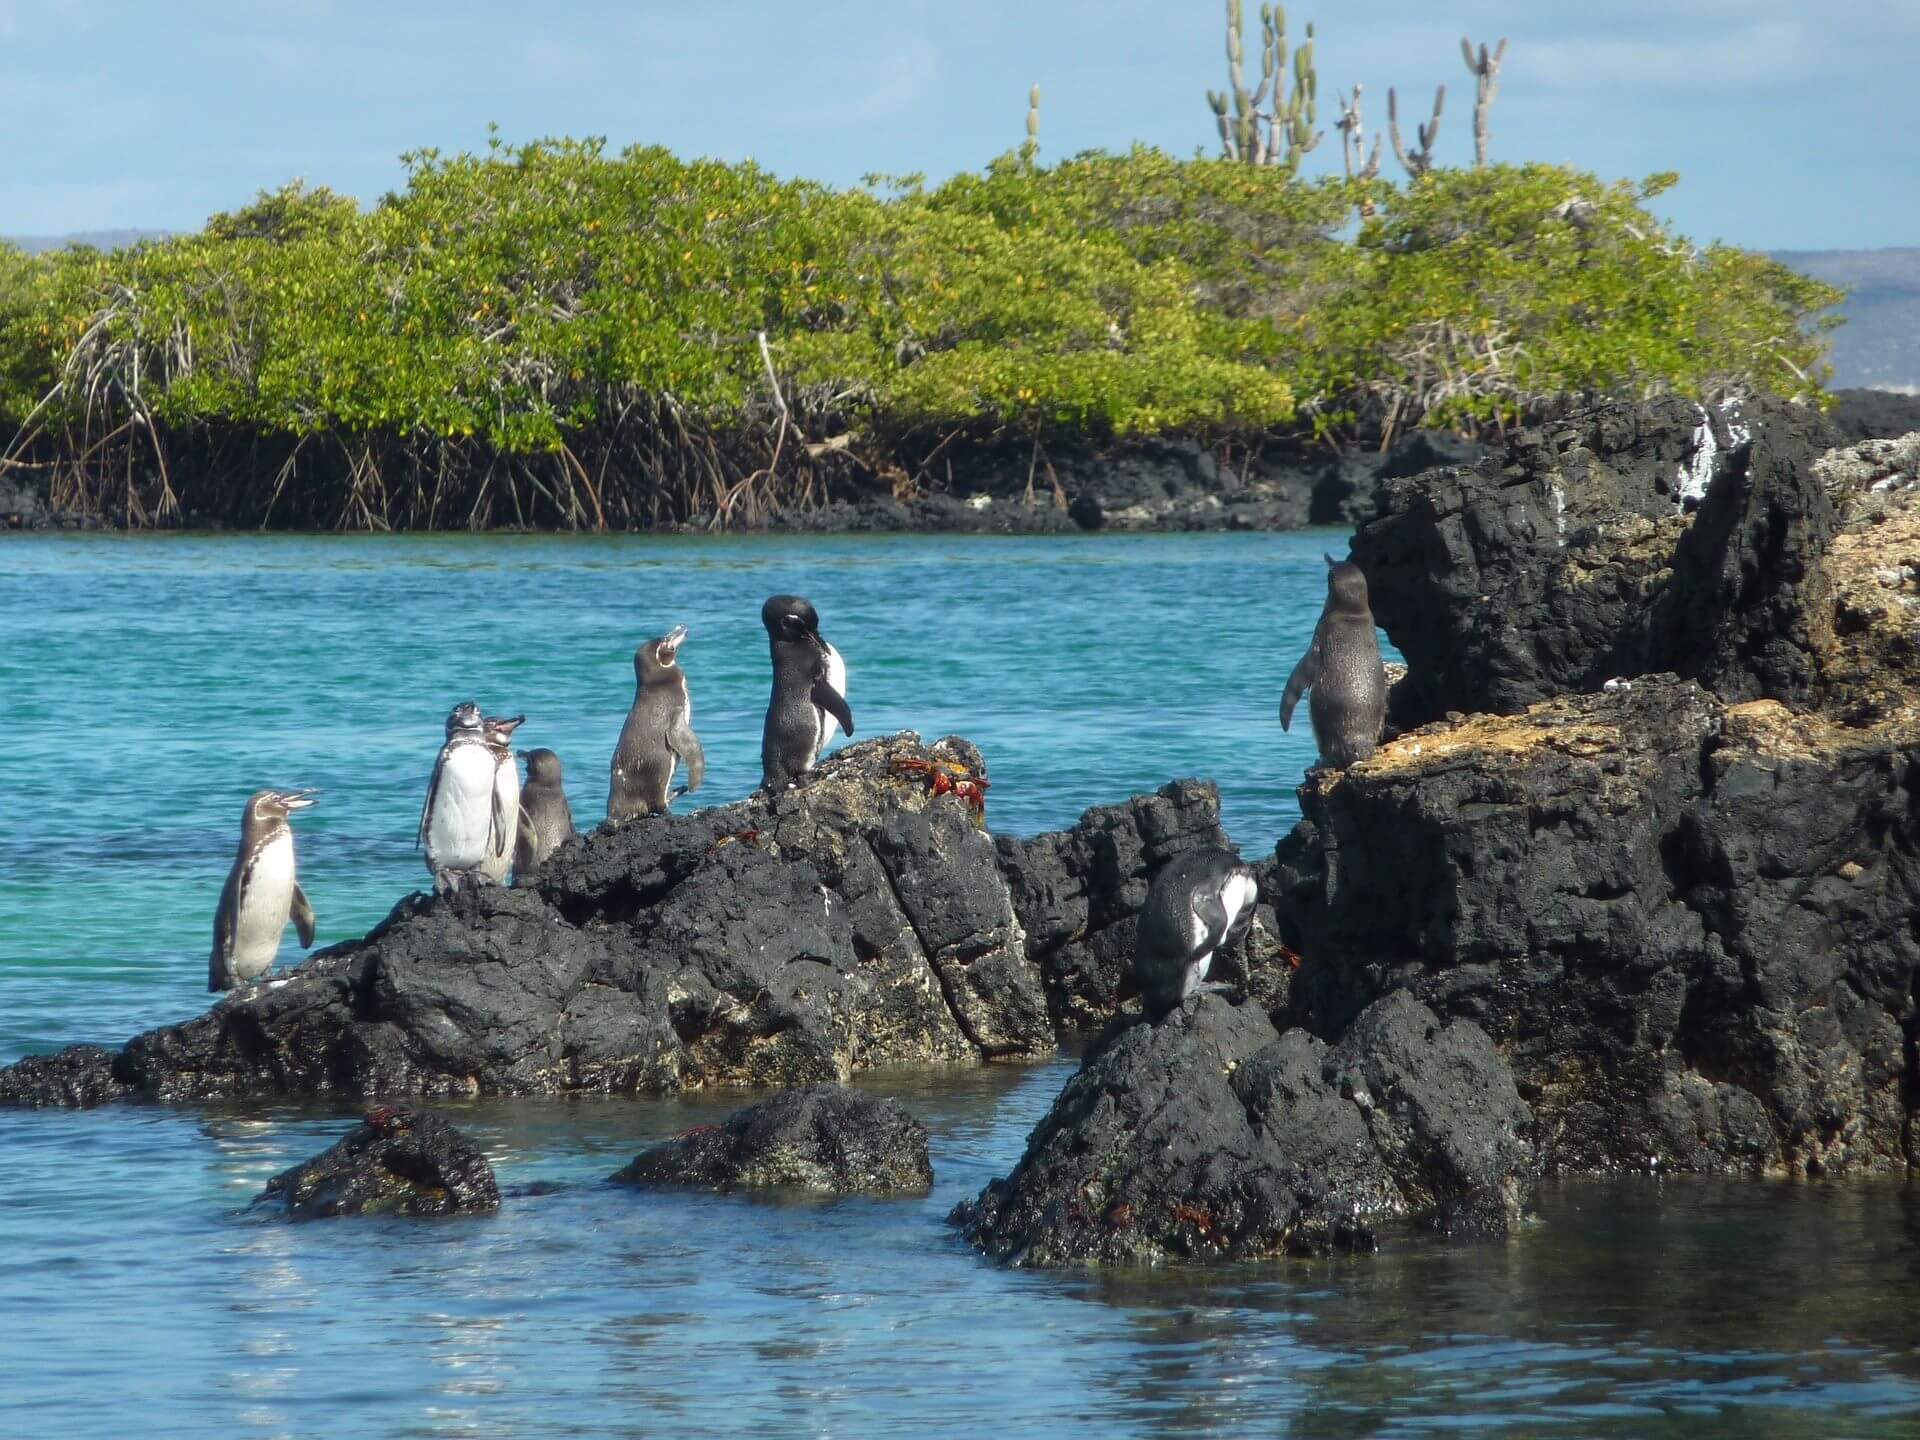 Penguins on a rock formation in the Galápagos